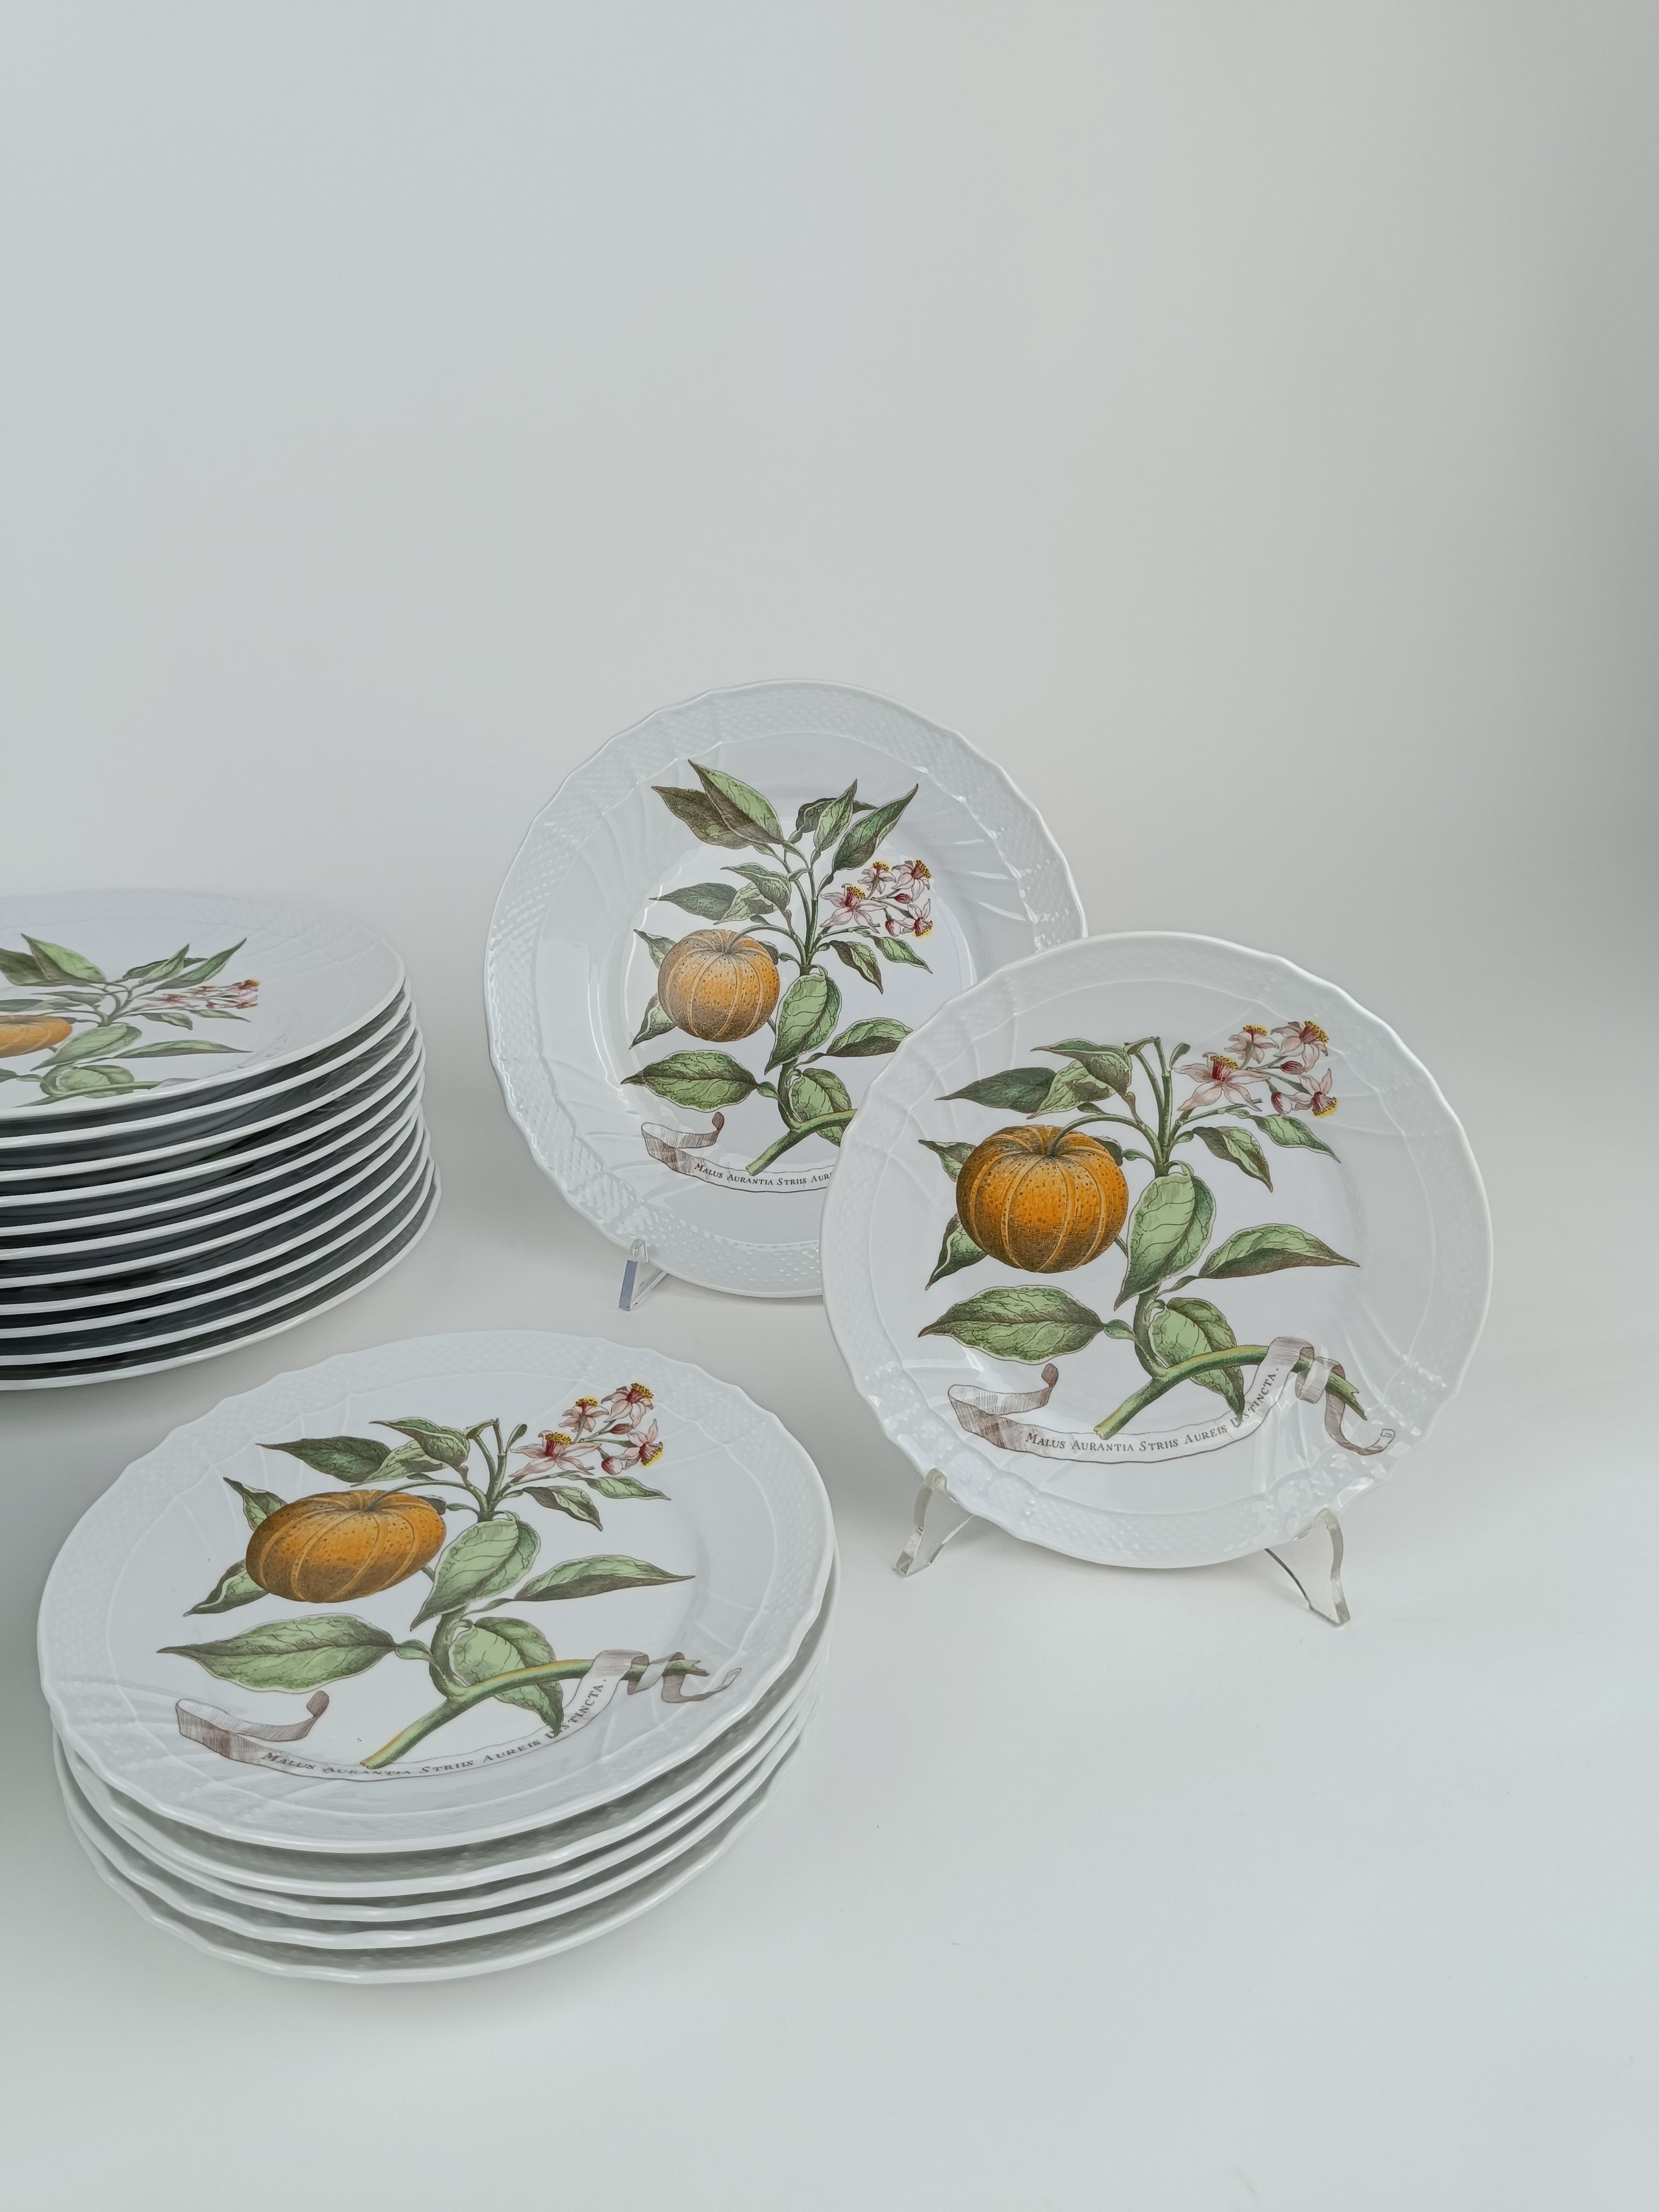 Richard Ginori China Dinner Service with a botanical print by Munting Abraham For Sale 6